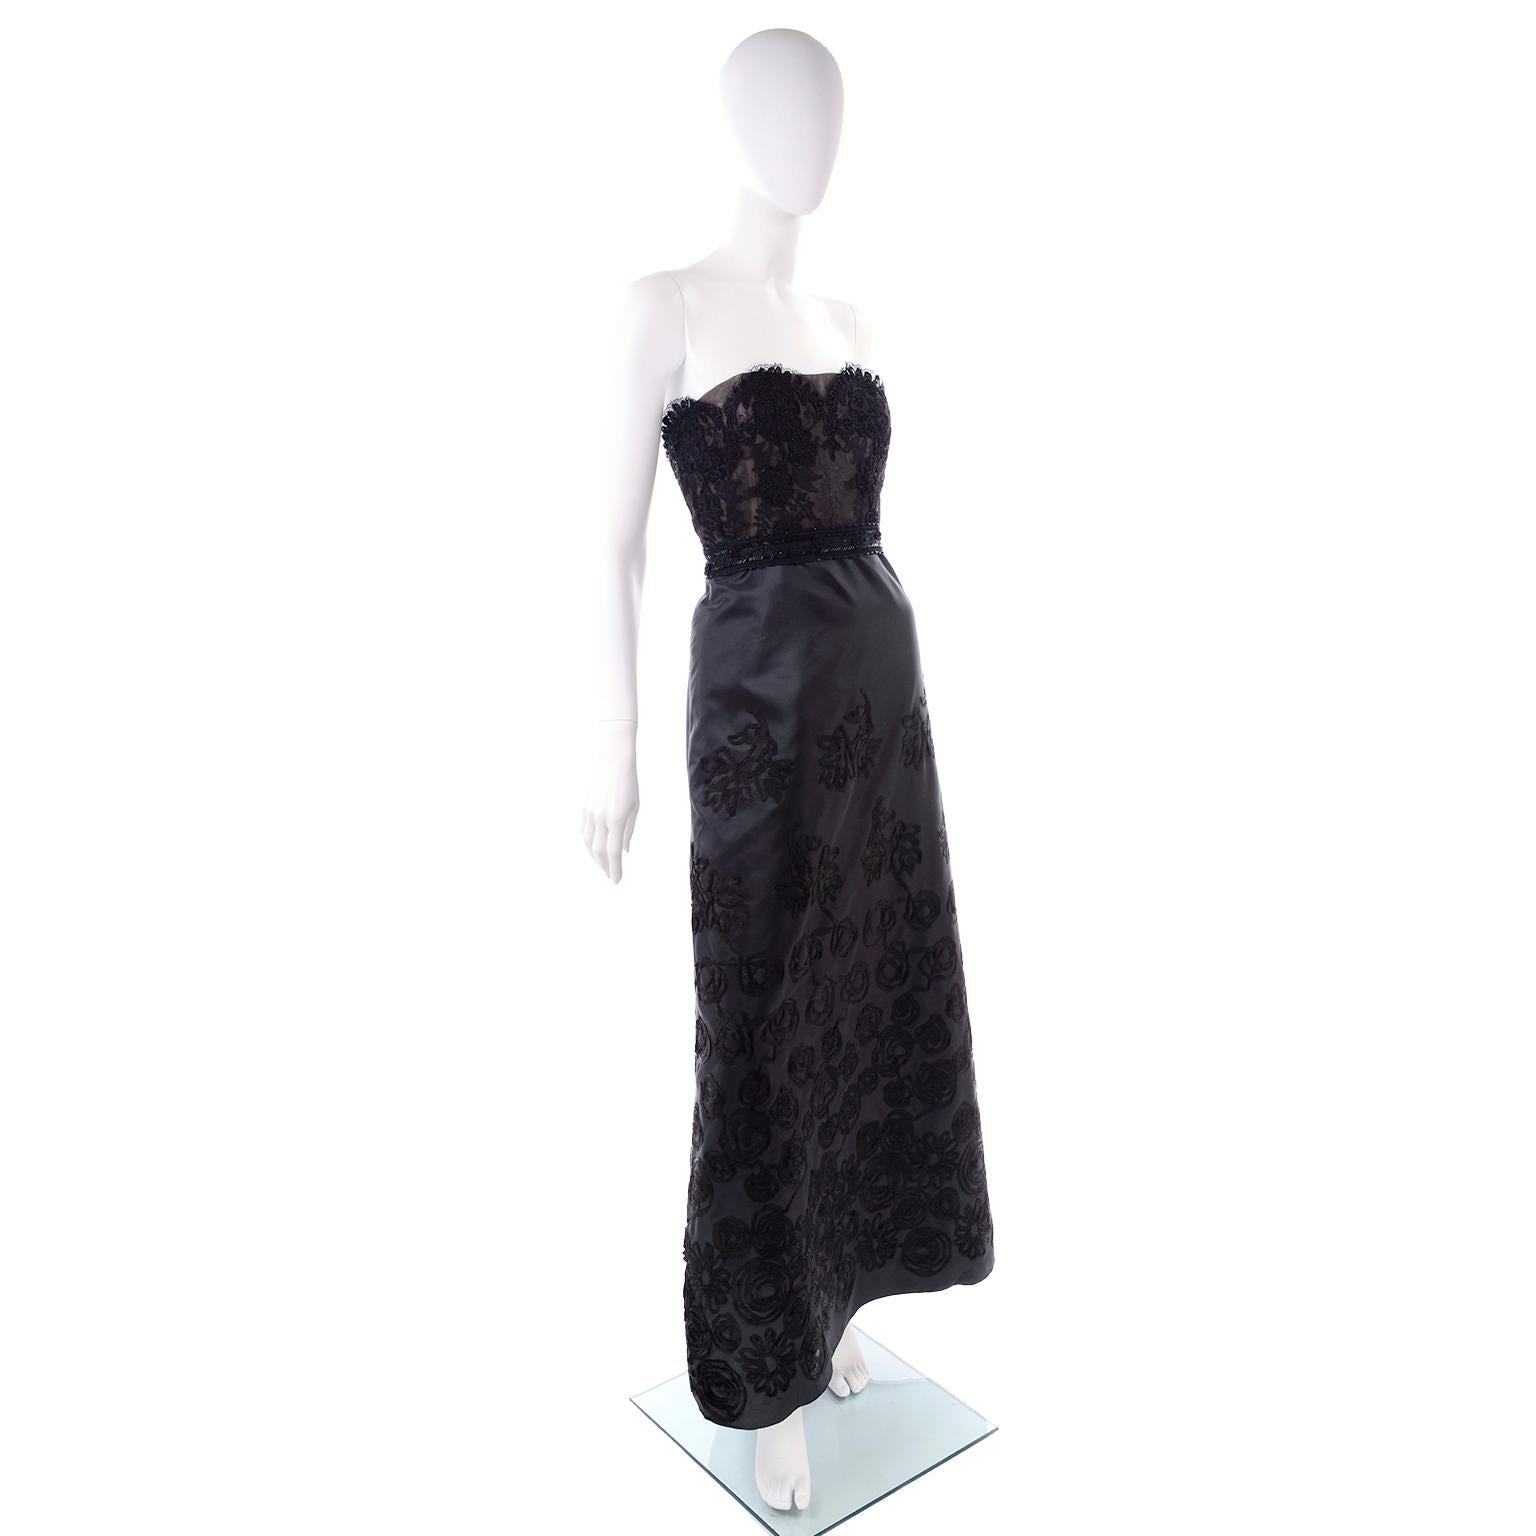 This vintage dress was designed by Christian Lacroix in 1999.  This black satin dress is strapless and has beautiful lace overlays and a lace waistband.  The dress closes with Metal zipper down the back center seam and a hook-and-eye. The dress is